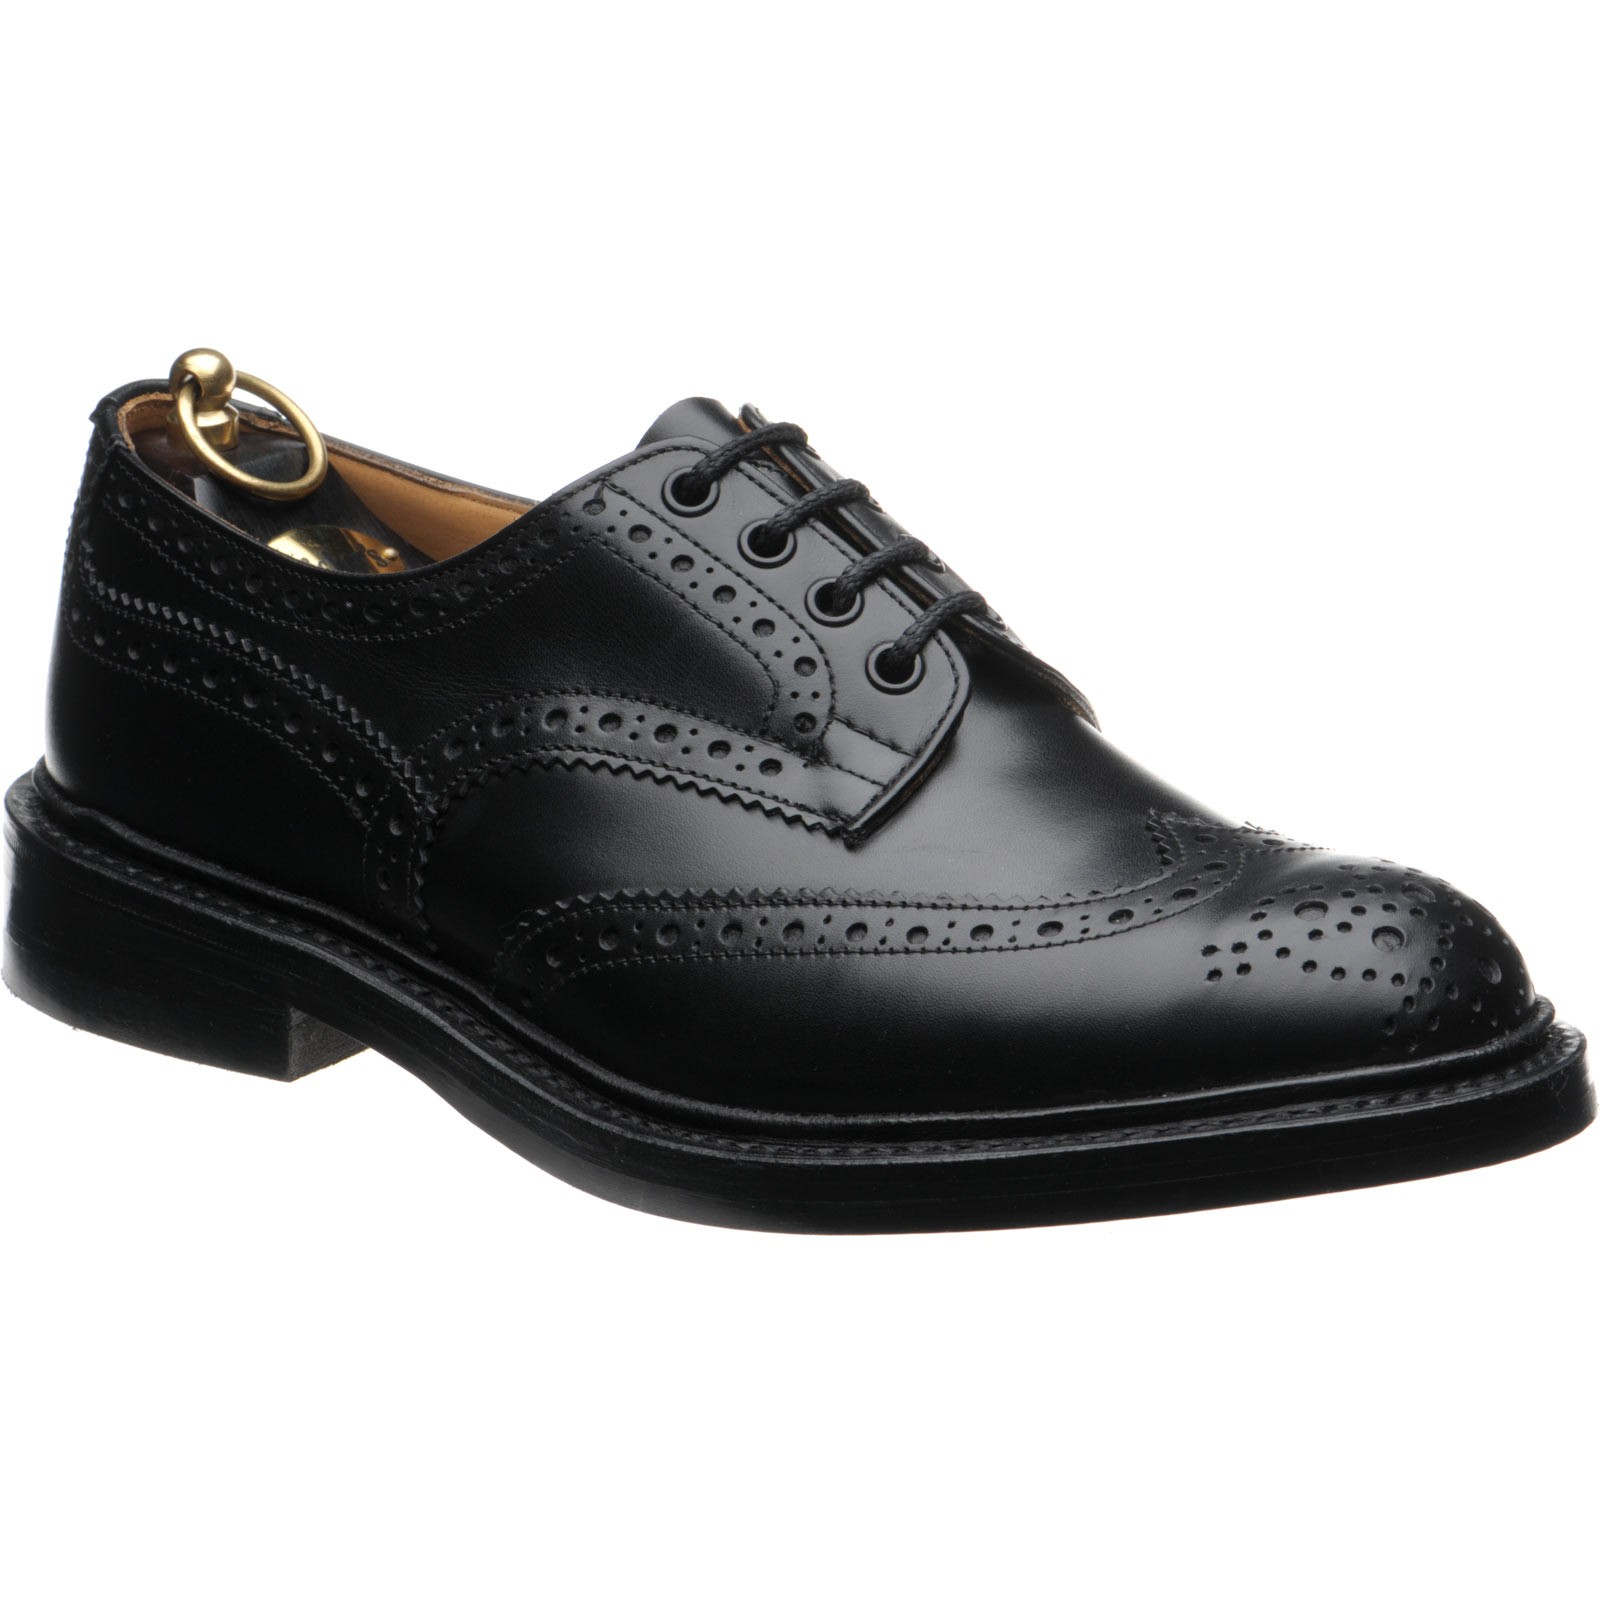 Trickers shoes | Trickers Country Collection | Bourton (Rubber) in ...